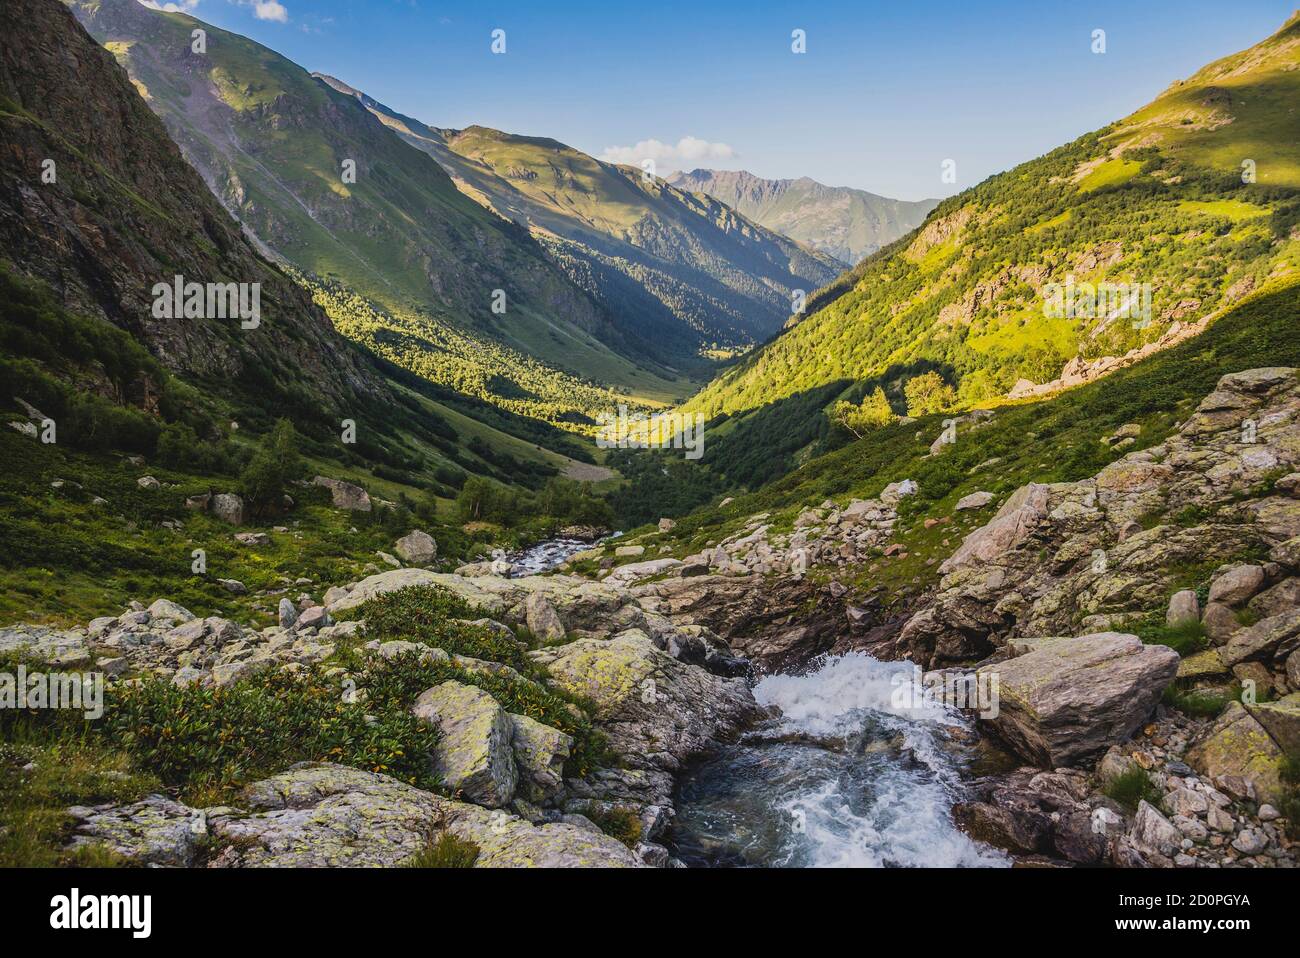 Summer landscape with waterfall on Imeretinka river in the mountains of Karachay-Cherkess Republic Stock Photo